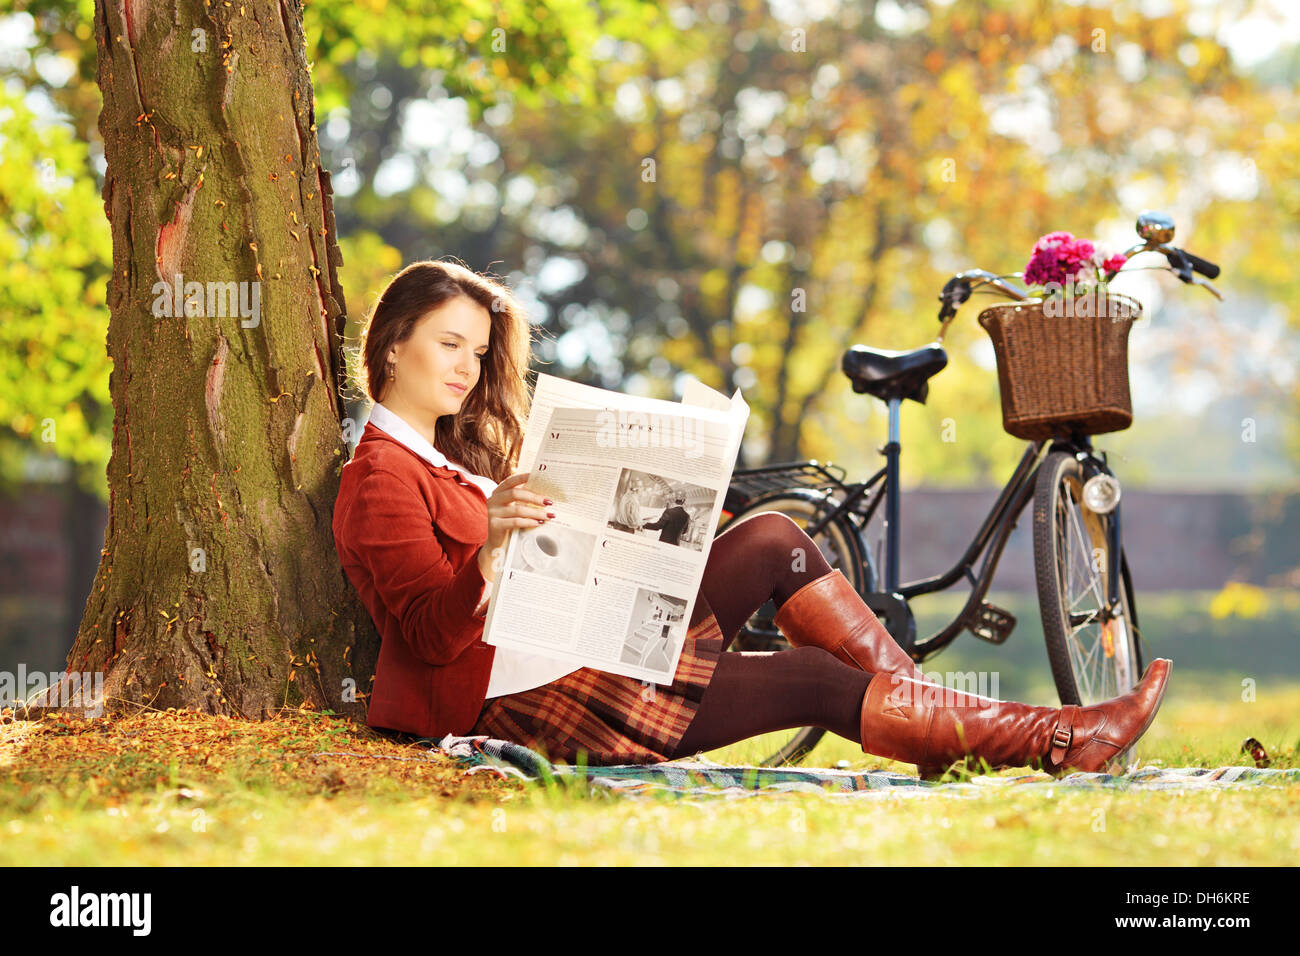 Young woman with bicycle sitting on a grass and reading a newspaper in a park Stock Photo